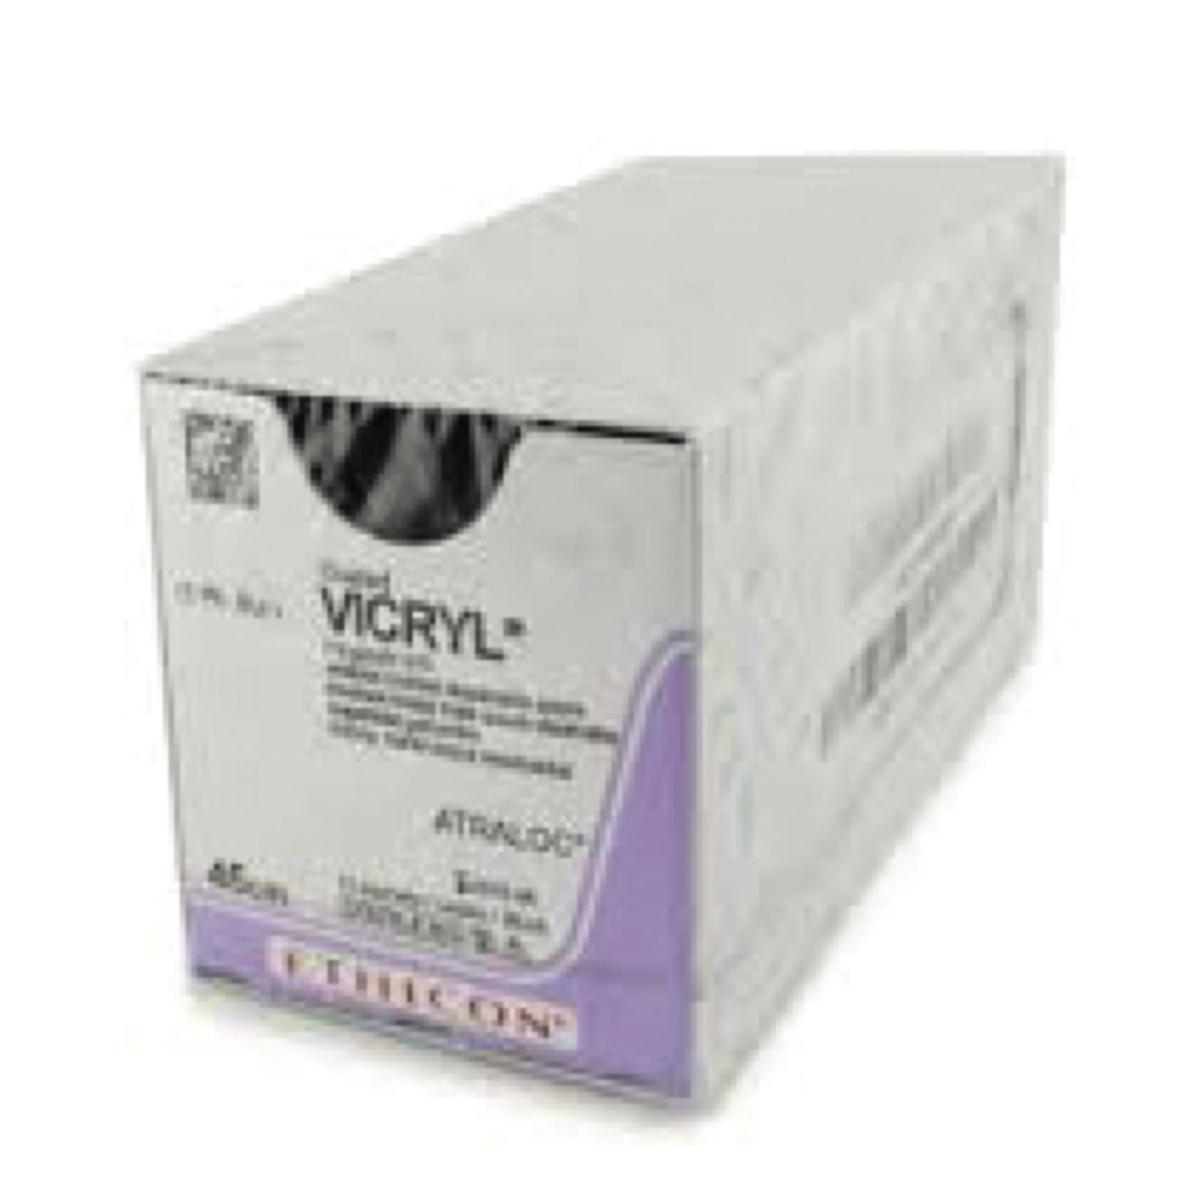 Vicryl Suture Violet Coated 20cm 6-0 1/2 Circle Spatula Double S-22 6mm 12pk